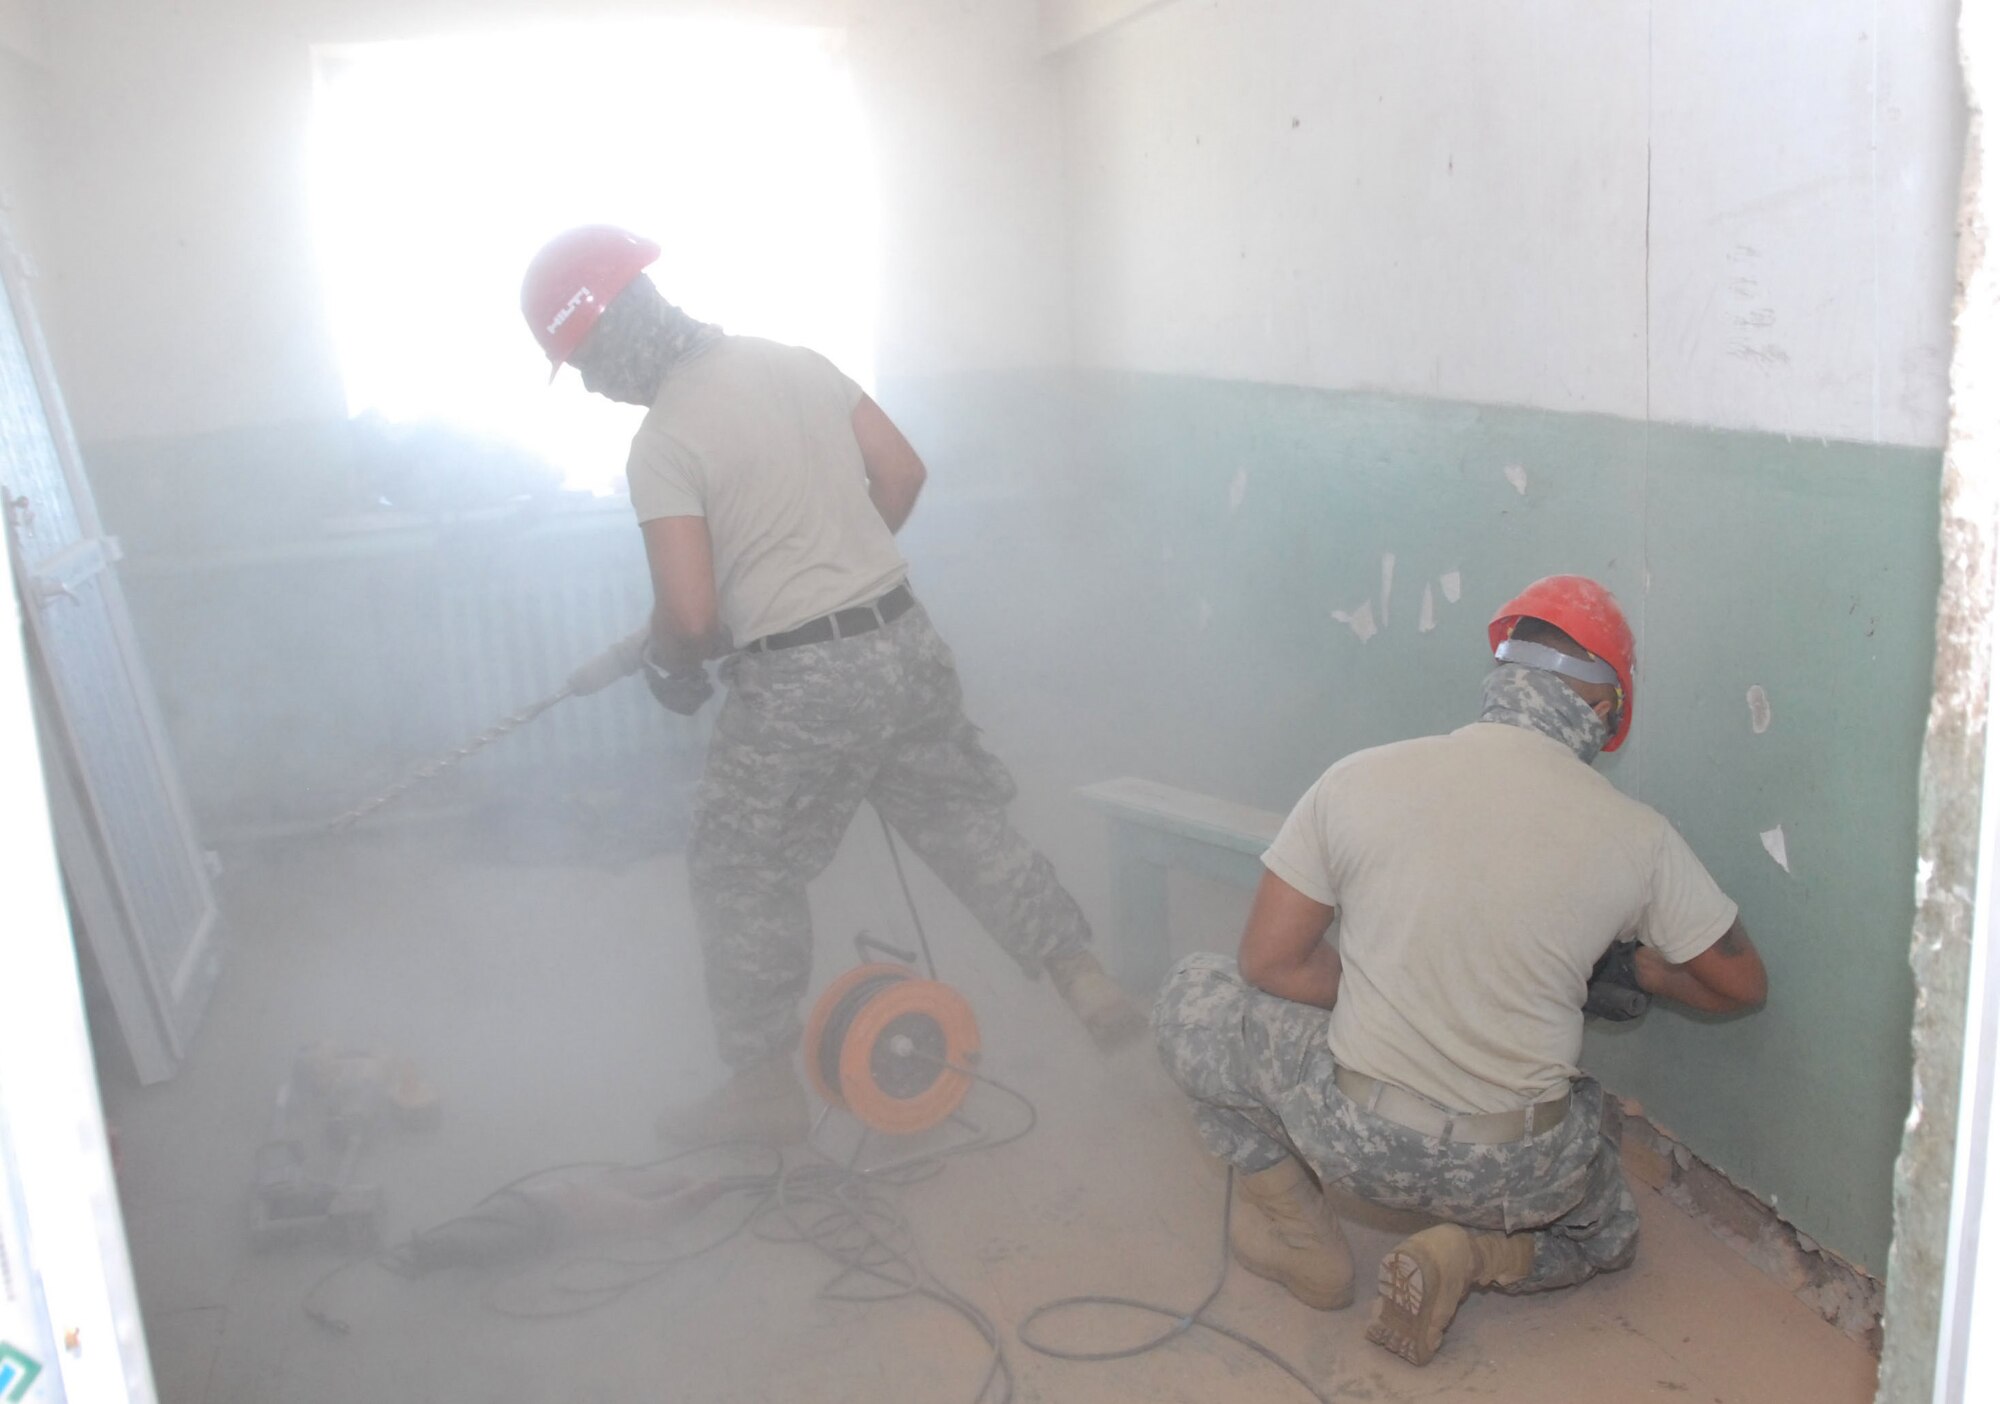 Staff Sergeant Lawrence Pinheiro, carpenter, and Sergeant Joey Fernandez, carpenter, amidst a cloud of dust in the school dormitory in Alton Bulaag, Mongolia, where a renovation project by the 871st Engineering Battalion, Wailuku, Hawaii is underway. The local school dormitory had last been renovated in 1961. The Army Guard plumbers, electricians, masons and carpenters began overhauling windows, doors, paint and flooring on Sept. 4, 2008, with a deadline for completion of Sept. 21. They renovations were part of the field-training exercise Khaan Quest 2008, a United Nations multinational peace support exercise in Mongolia at Camp Five Hills Training Center near Ulaan Baatar. Alaska Air National Guard photo by MSgt. Jules Barklow.